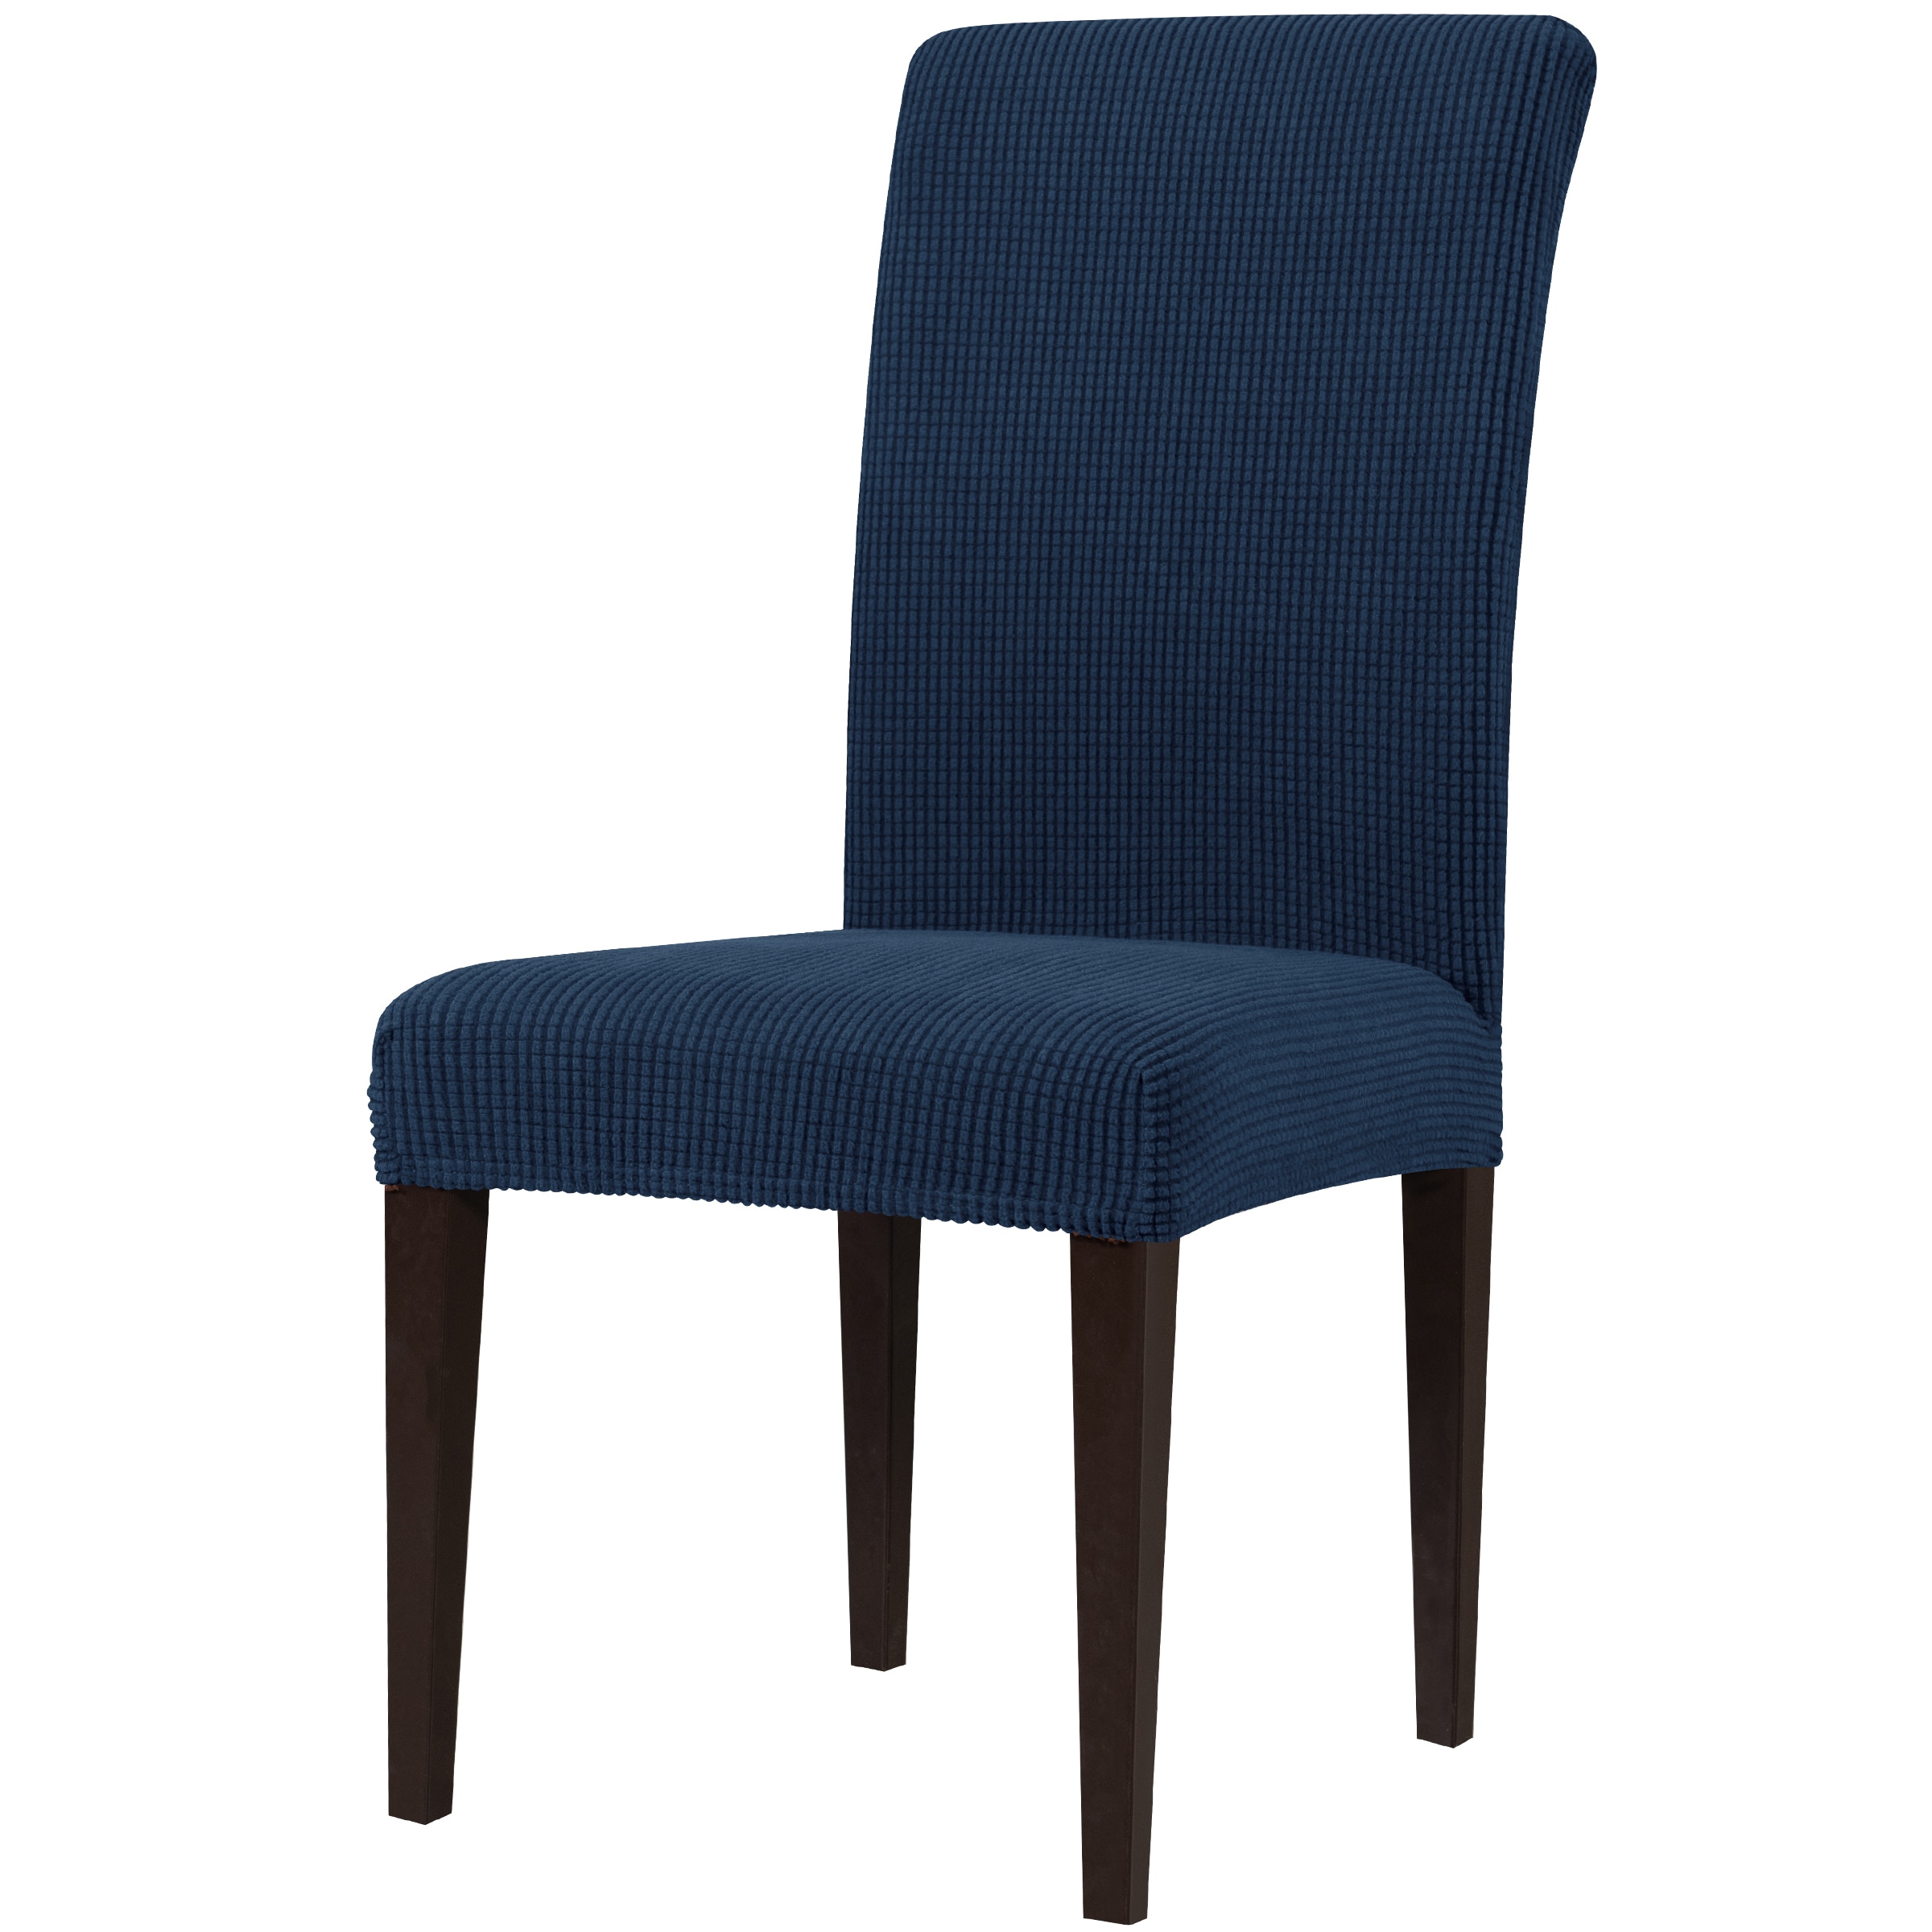 1/4pc Dining Chair Seat Cover Spandex Stretch Replacement Protector Slipcover 